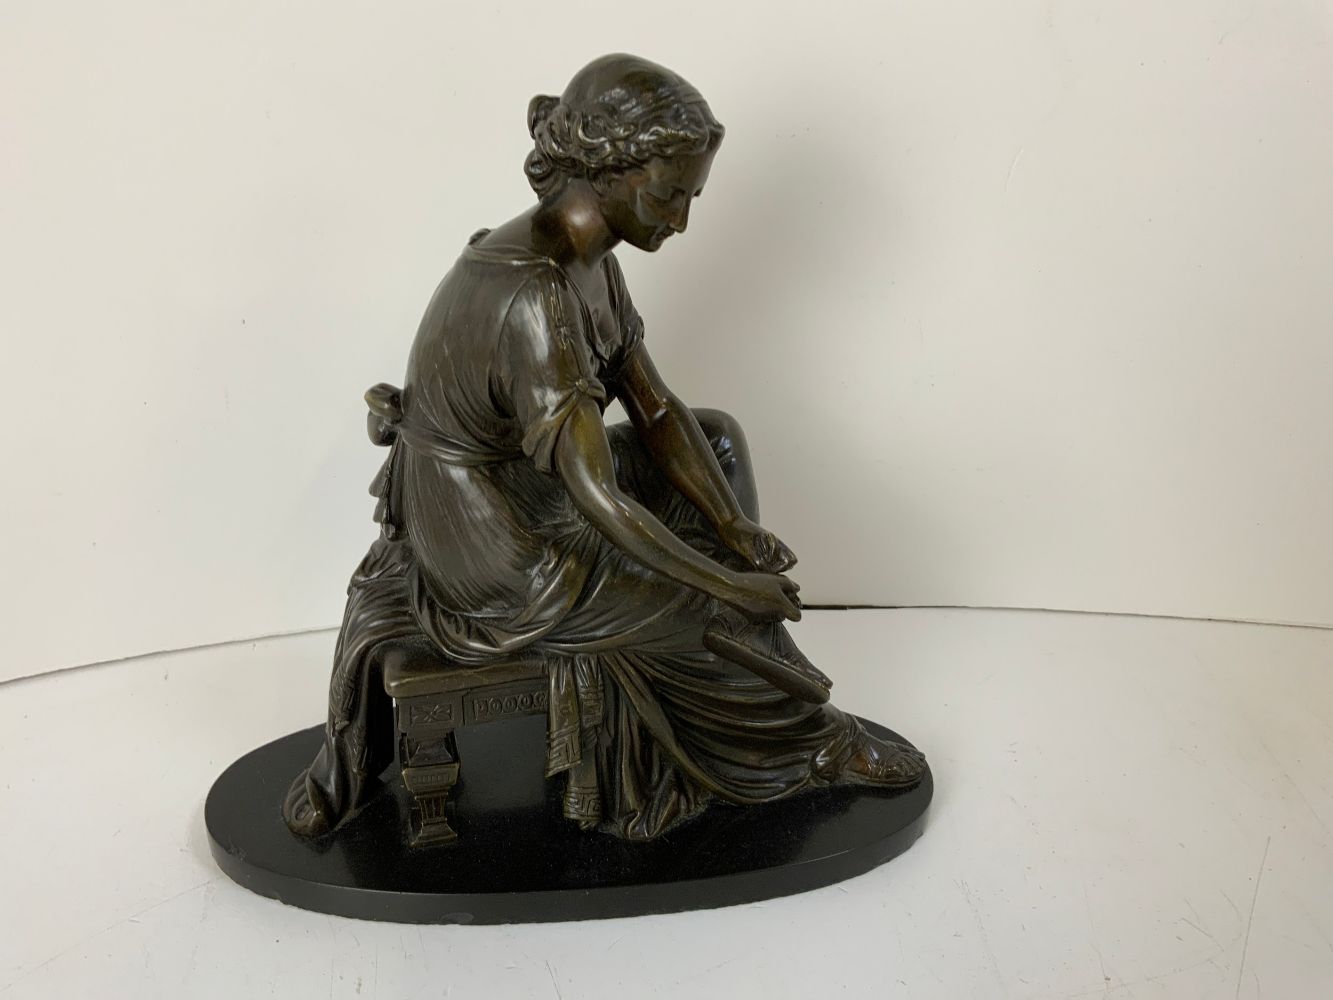 Homewares and Interiors Sale - Please see Auction Info re: Viewing